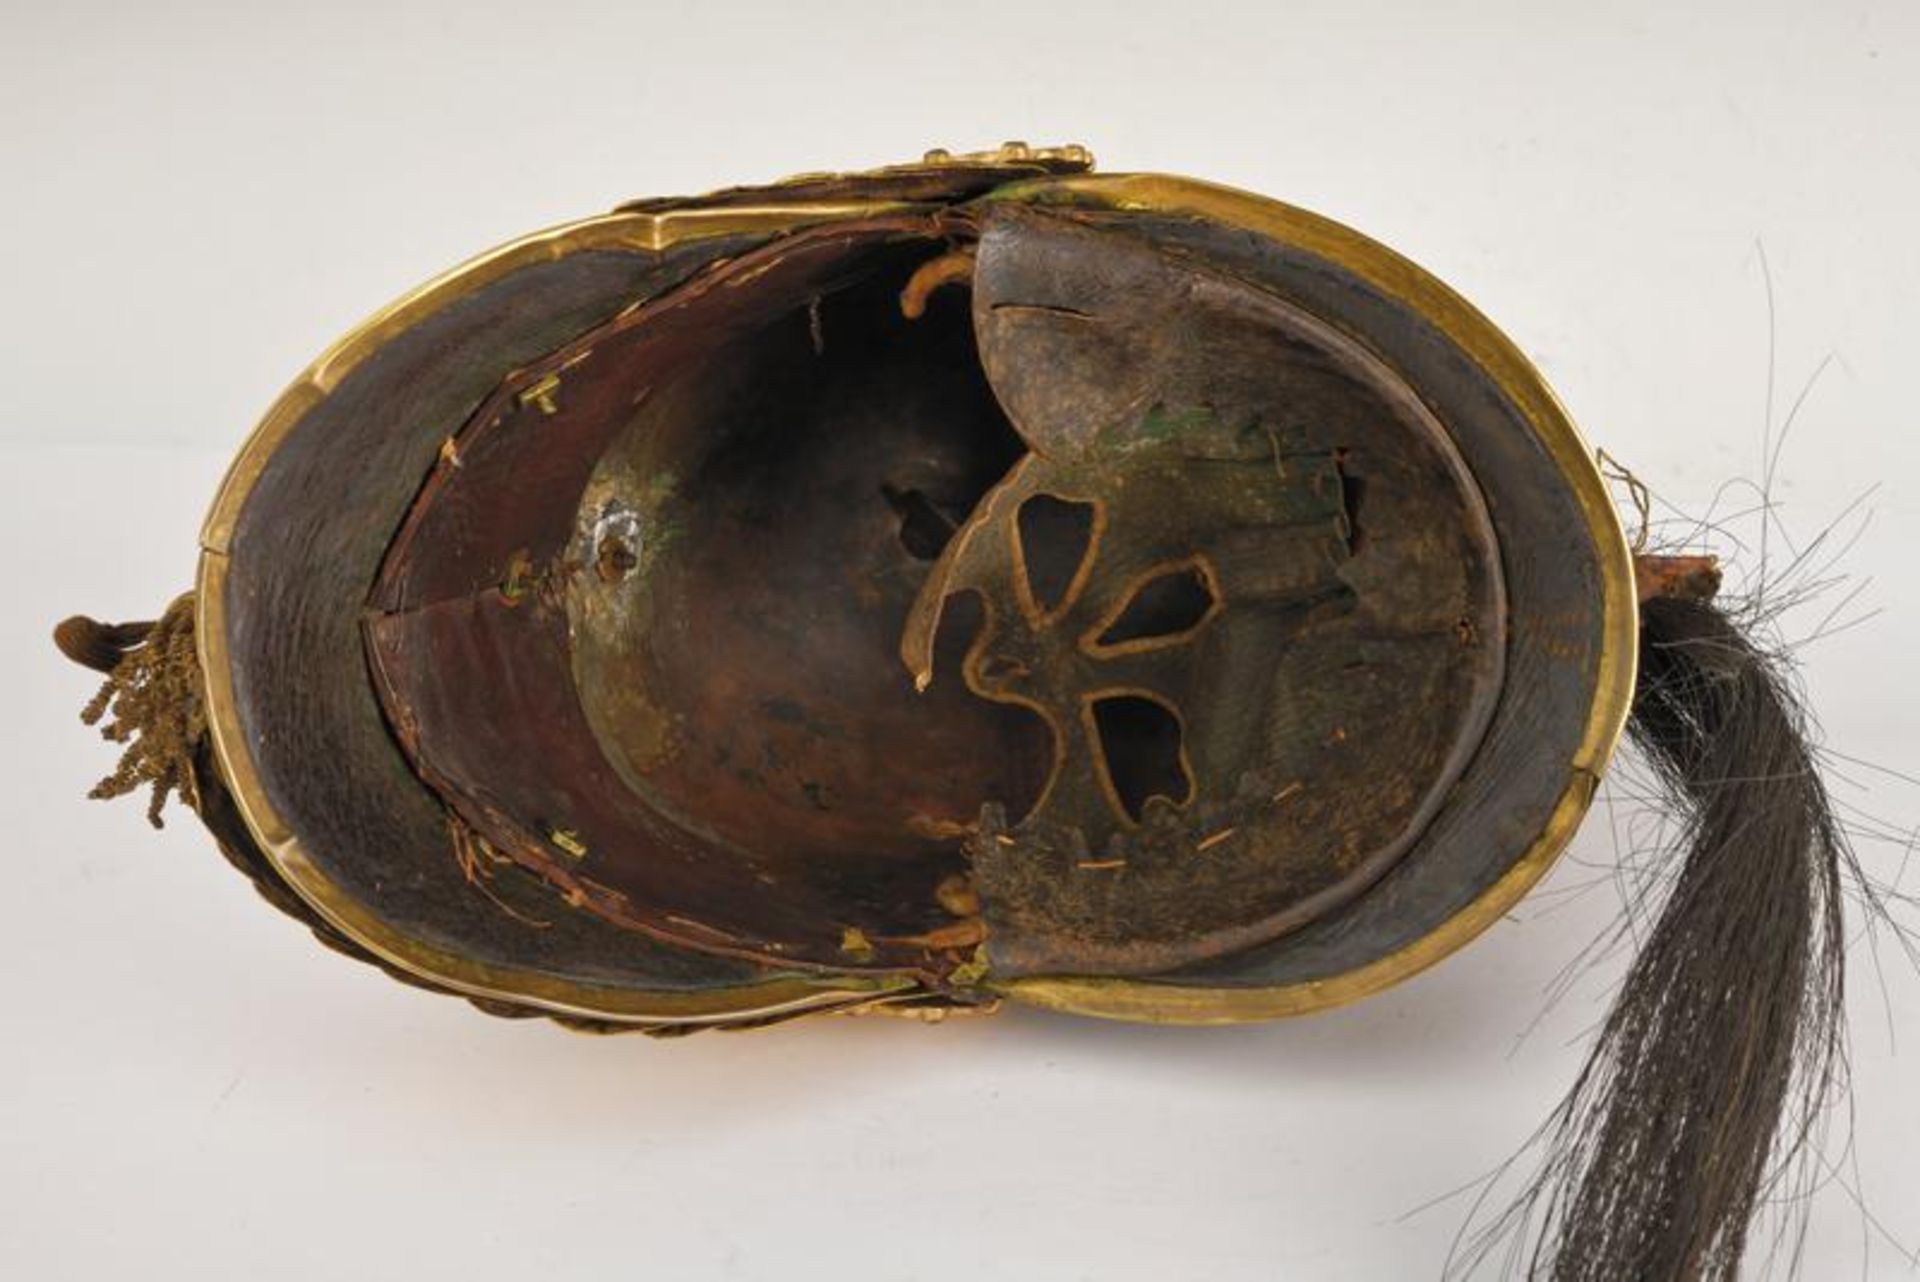 A very rare officer's helmet of the 'Piemonte Reale' regiment, epoch Carlo Alberto - Image 2 of 9